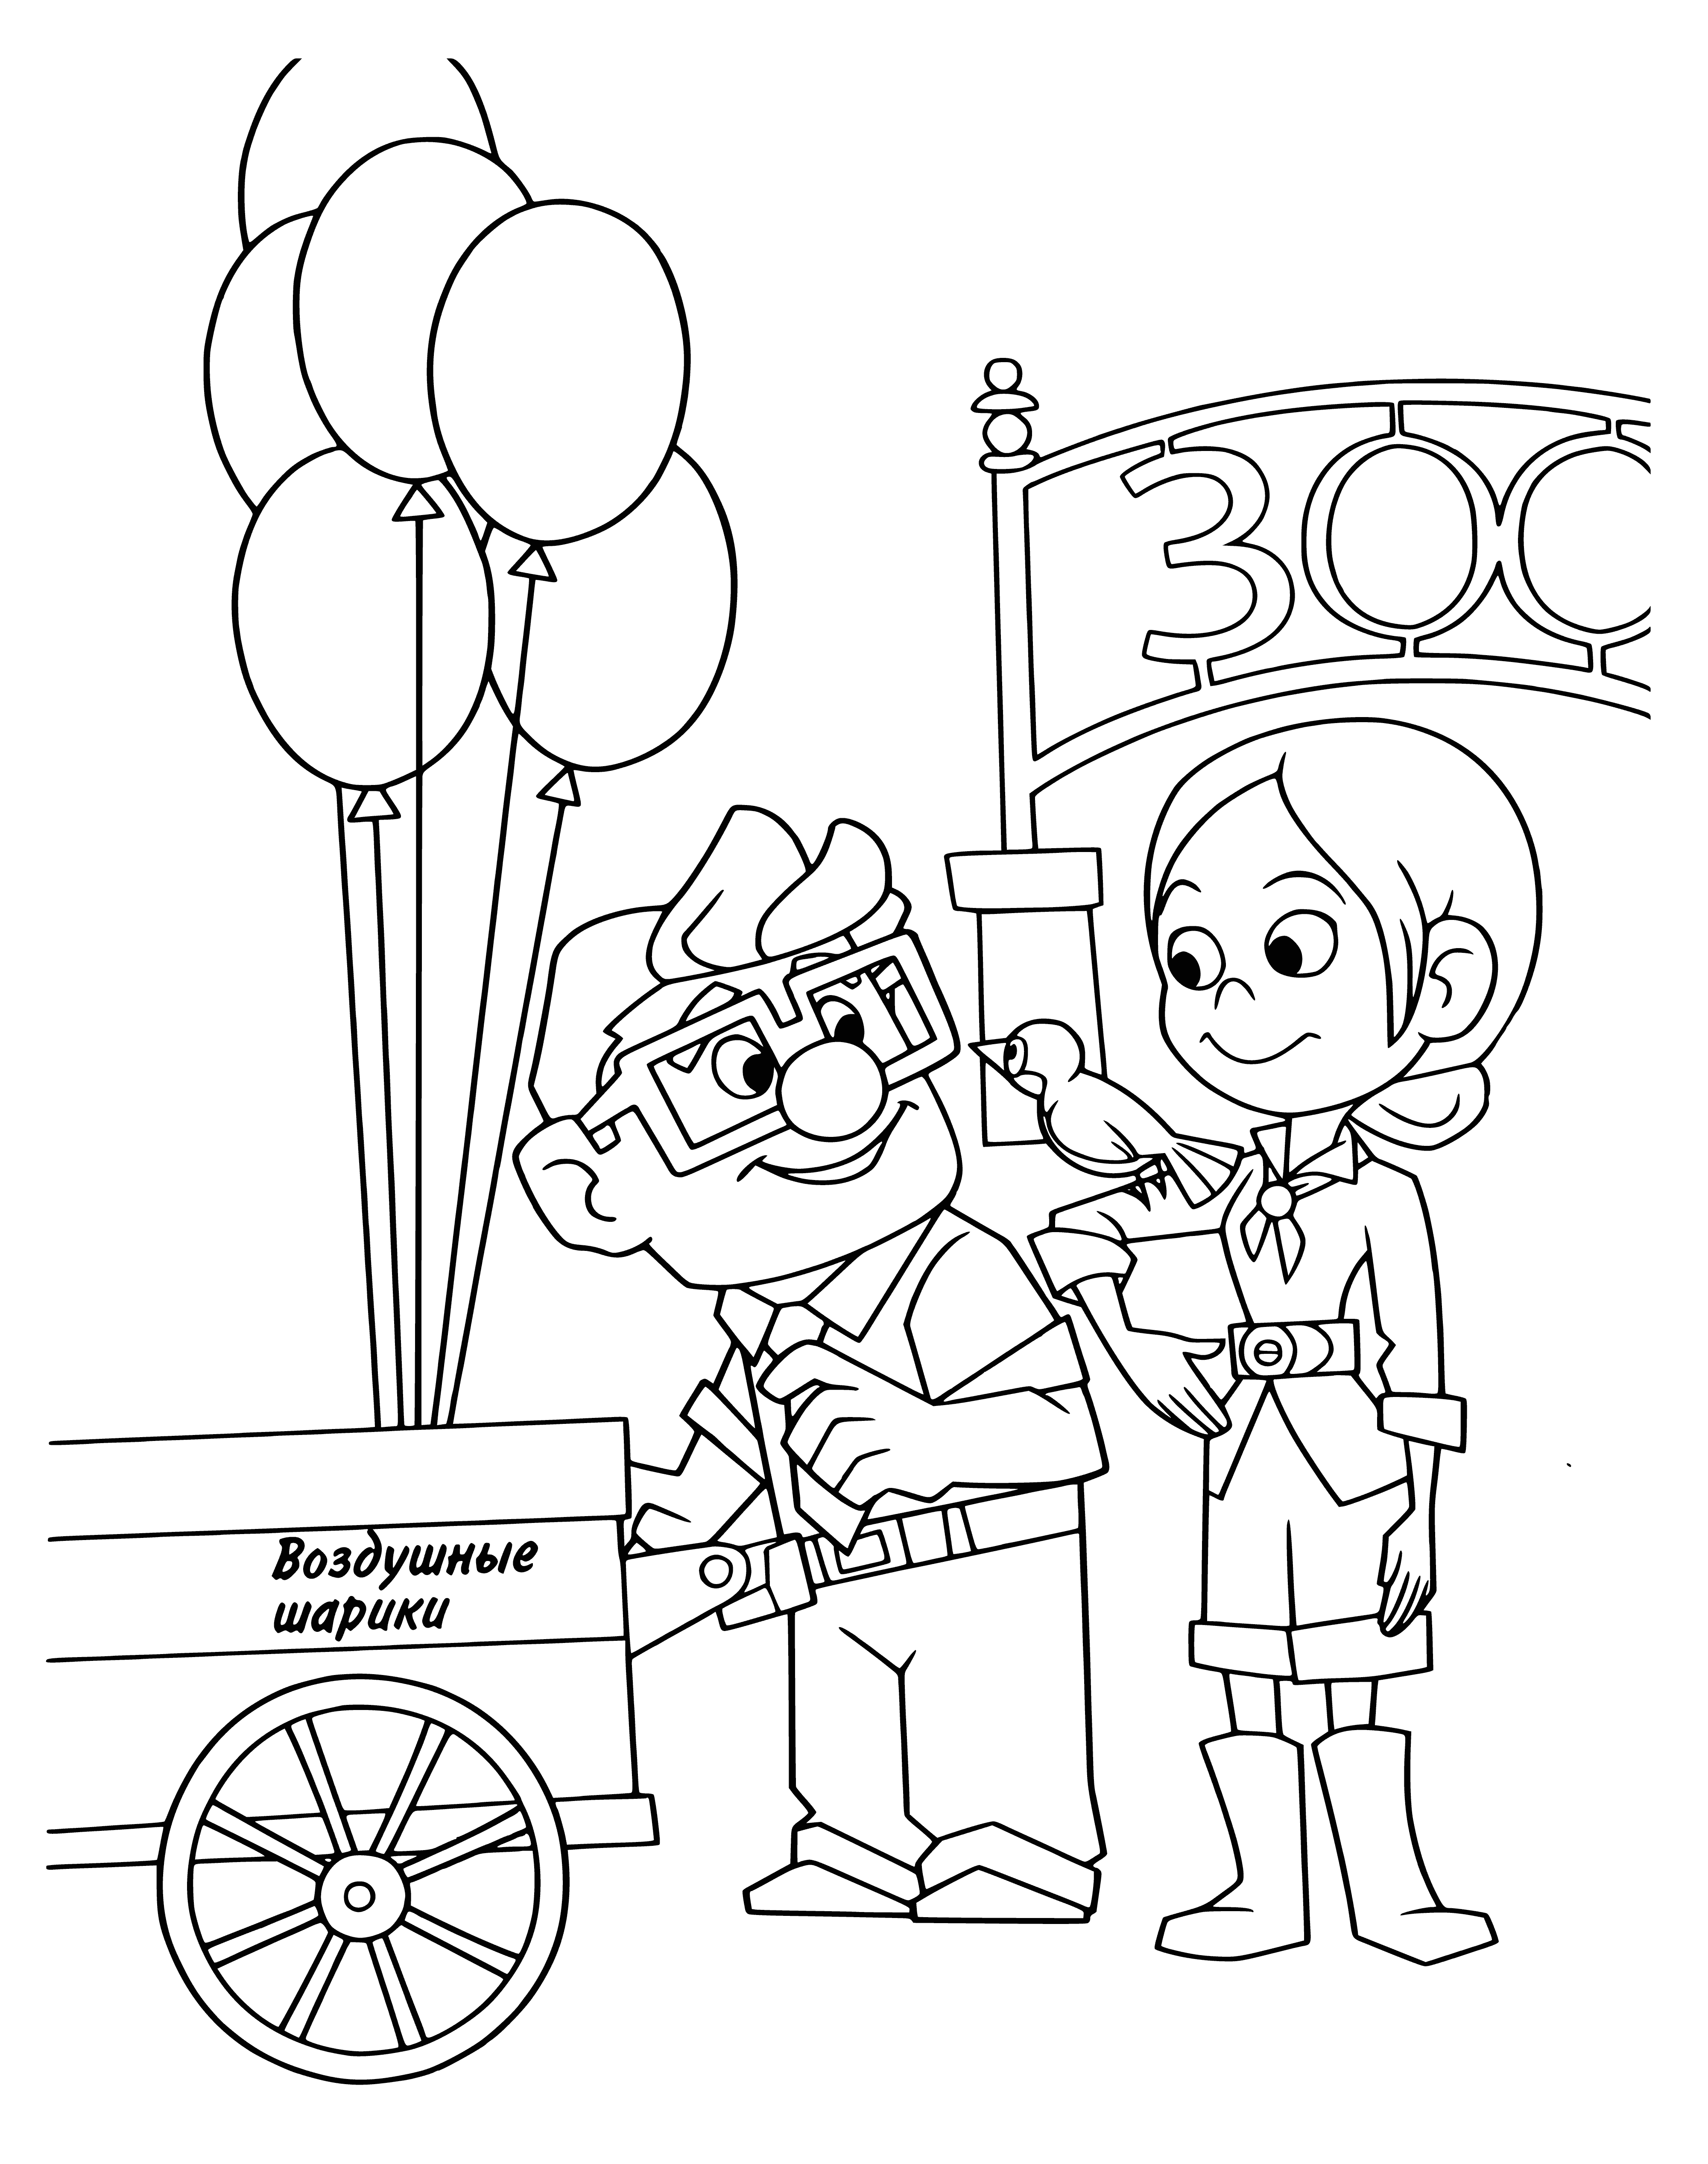 coloring page: Man & woman float up into sky, Ellie holds onto Karl, both smiling happily.